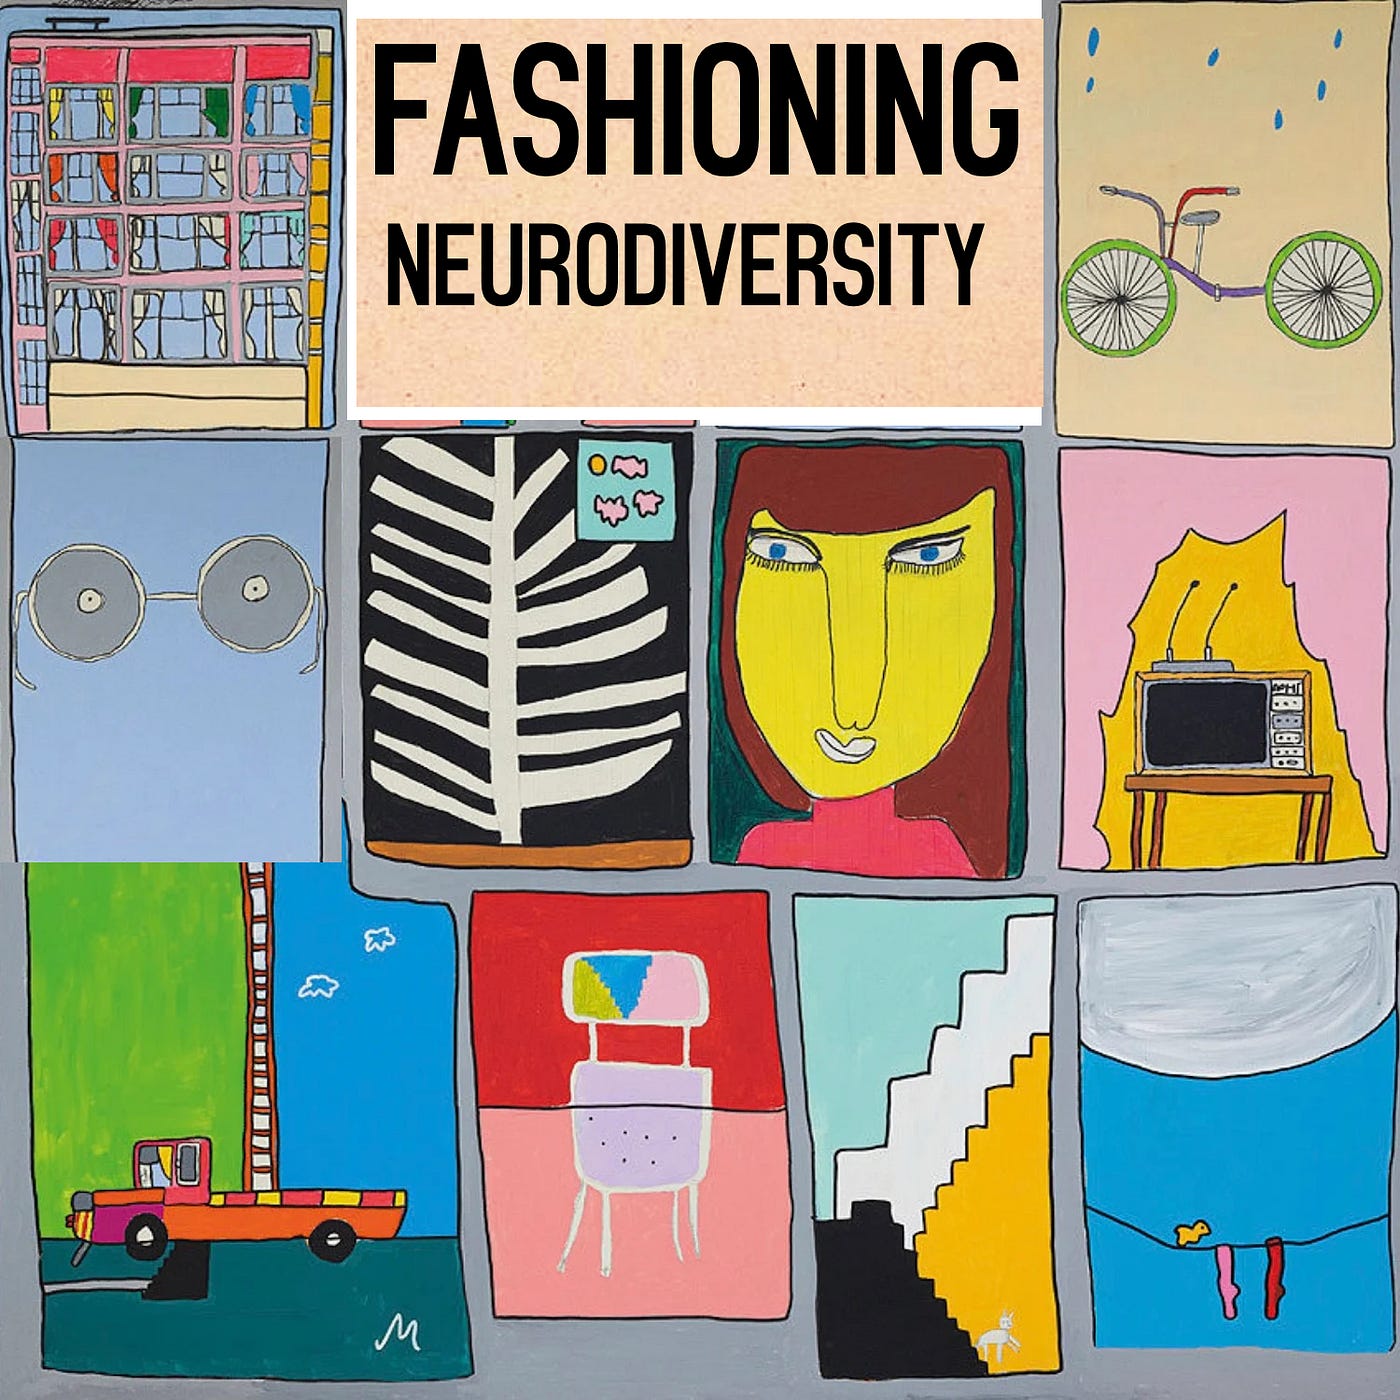 Fashioning Neurodiversity. “Every individual has their own unique